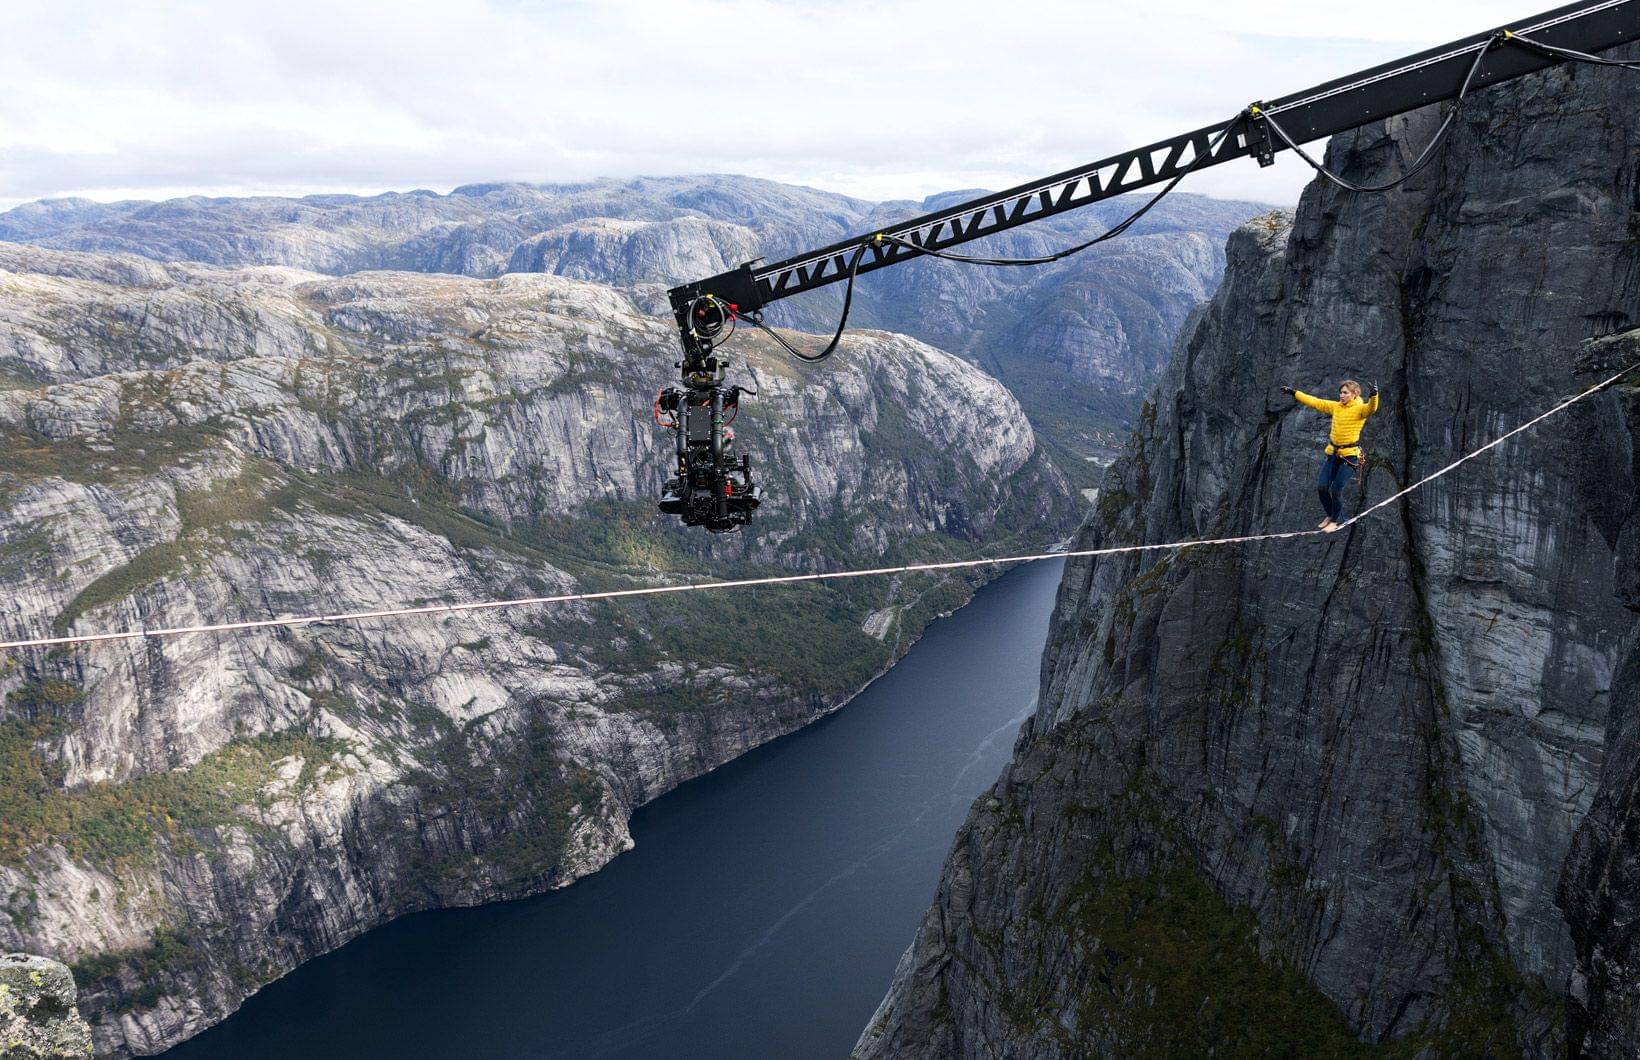 How the tightrope scene was captured in Apple Immersive Video. Source: Apple.